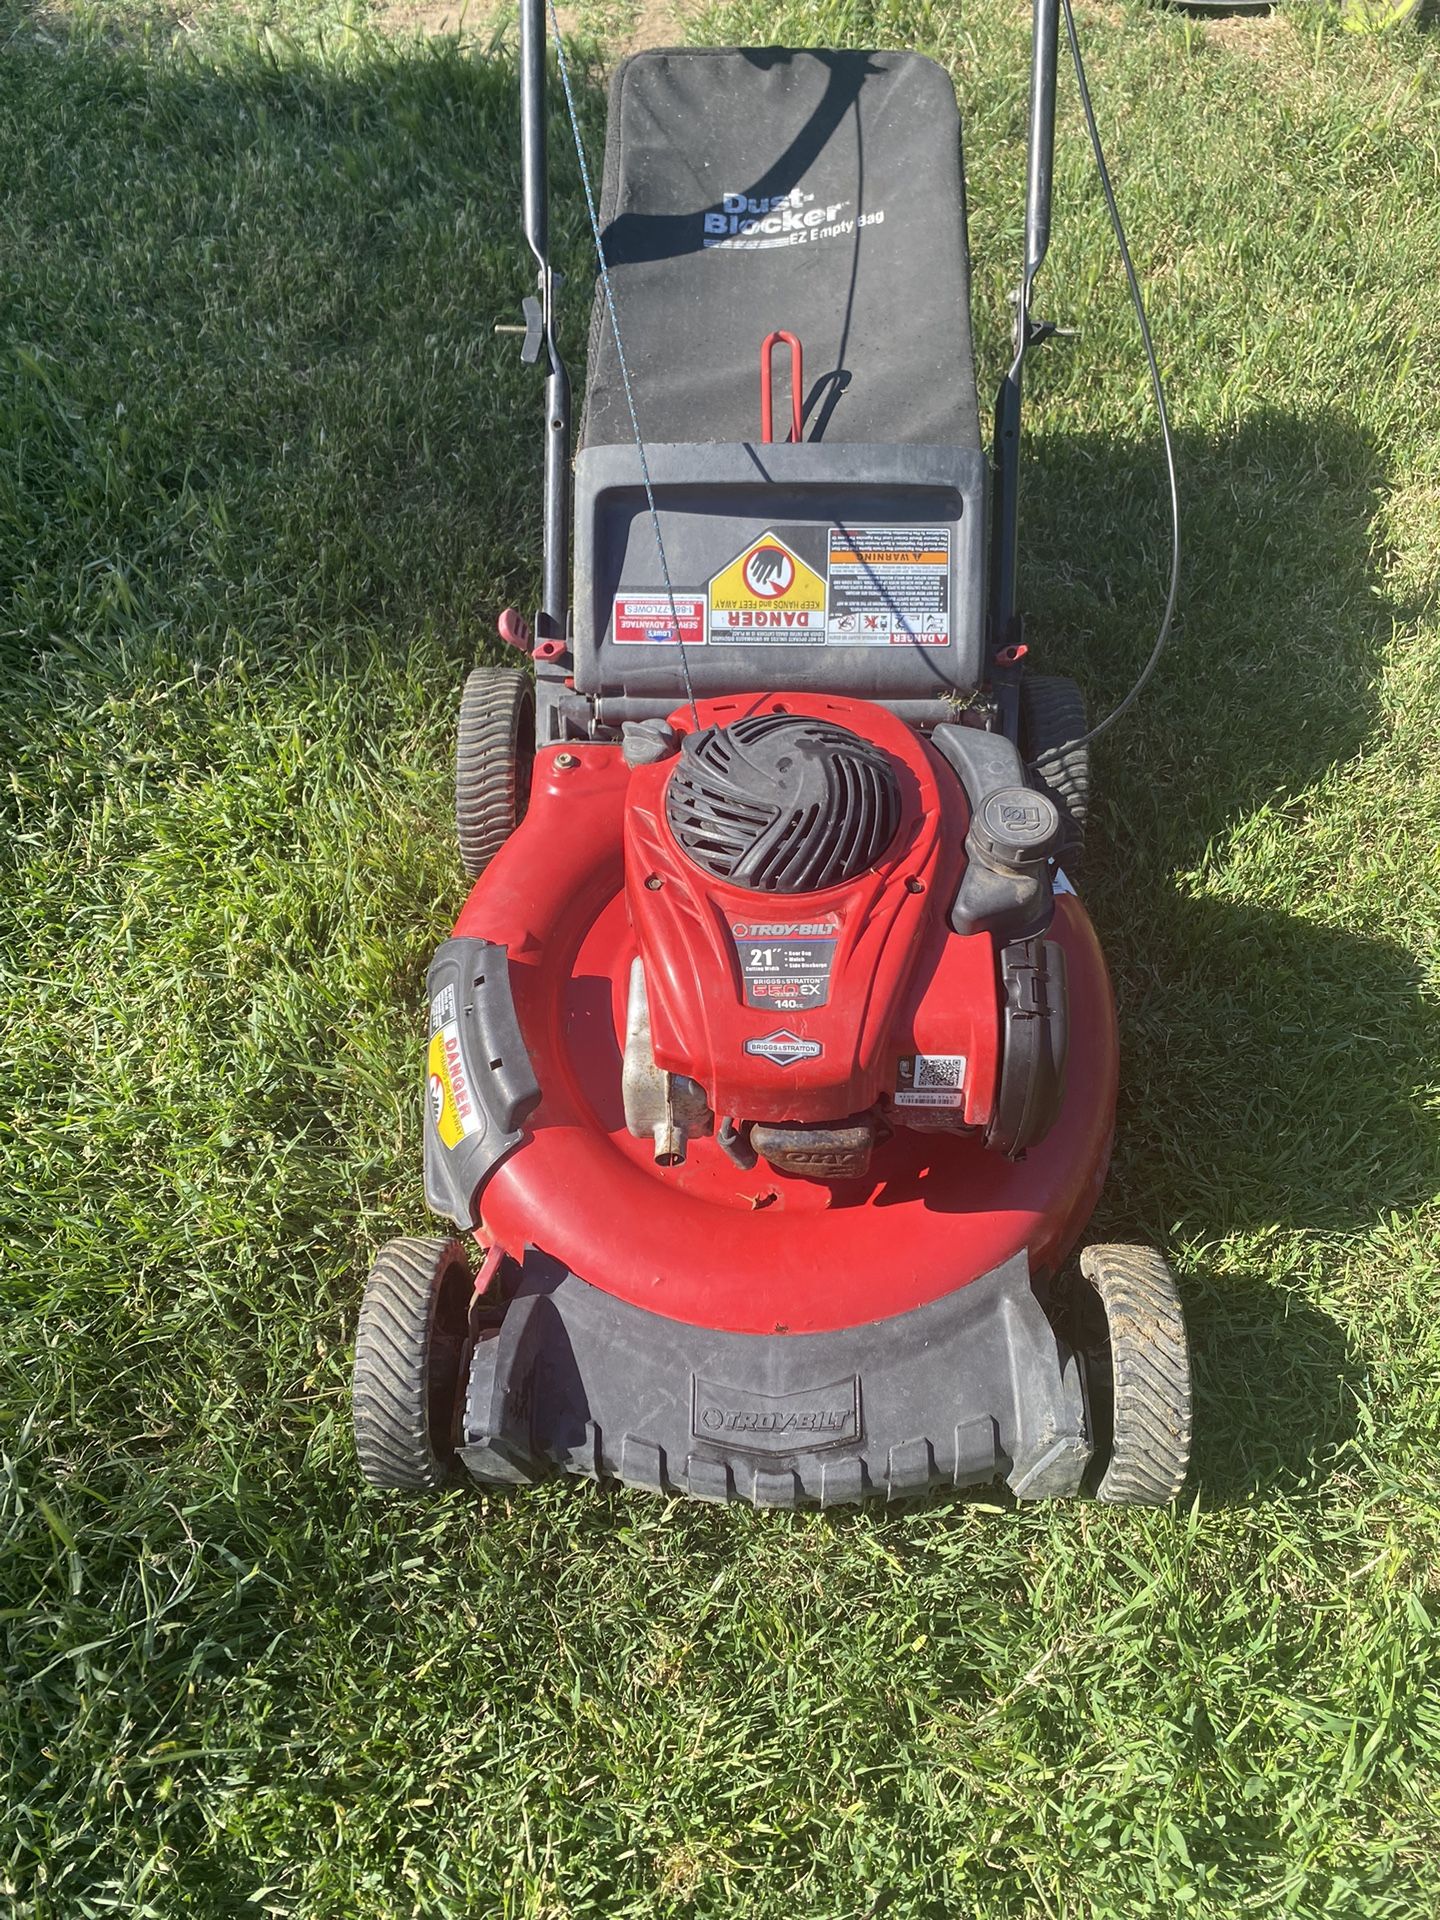 Working Lawnmower With Bag 